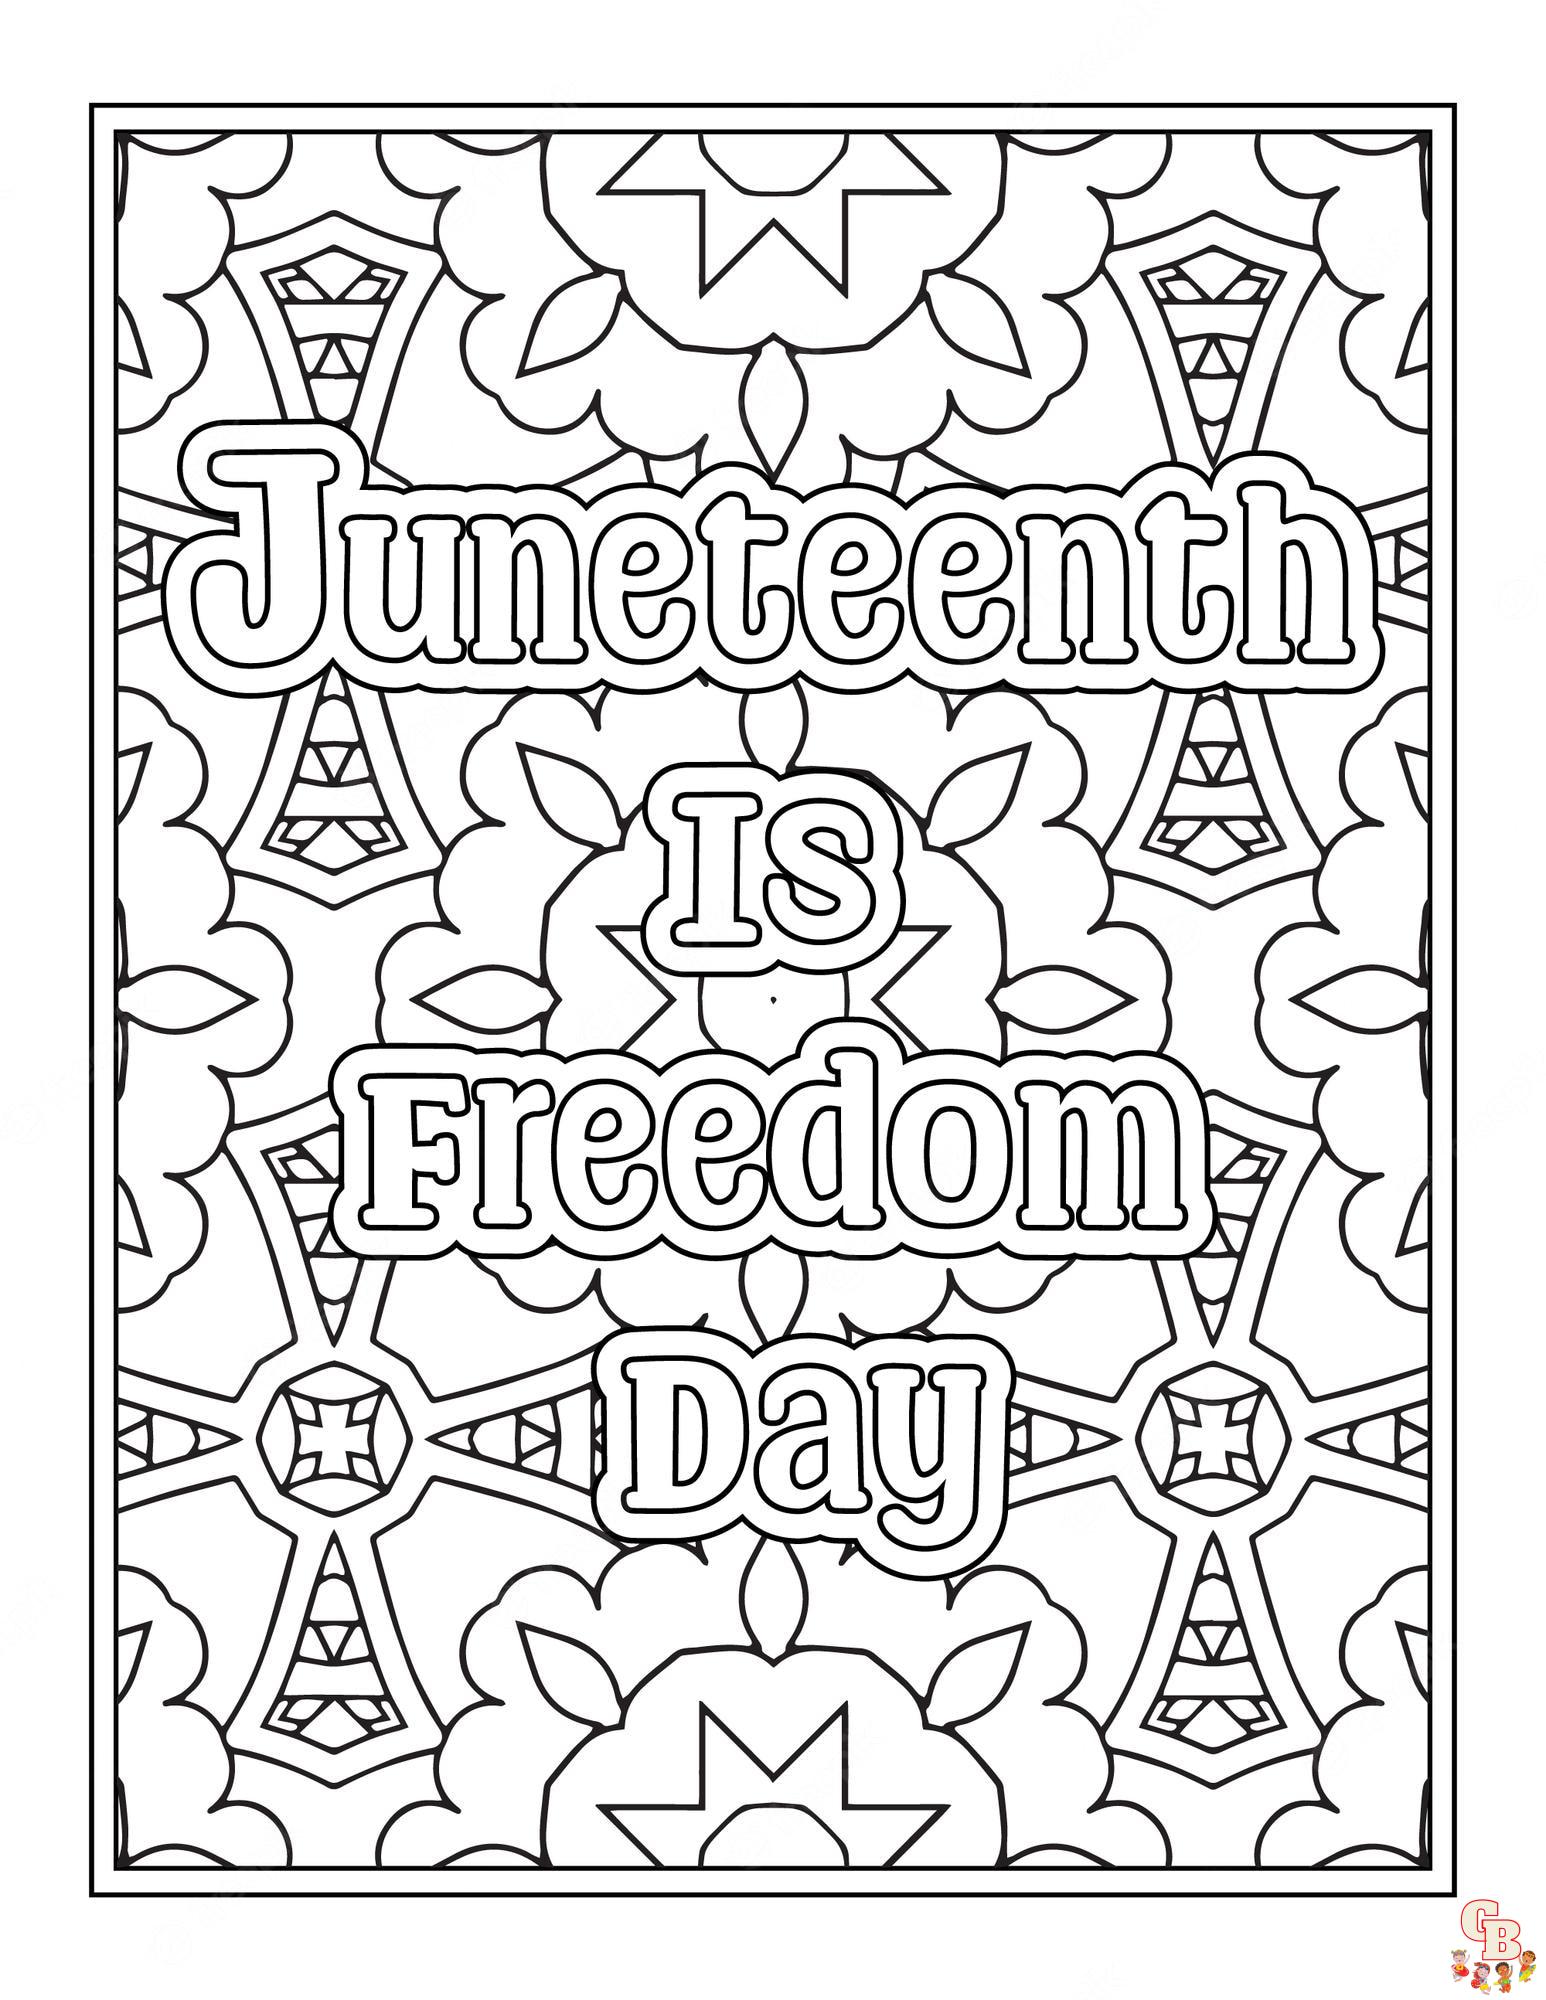 Celebrate juneteenth with engaging coloring pages